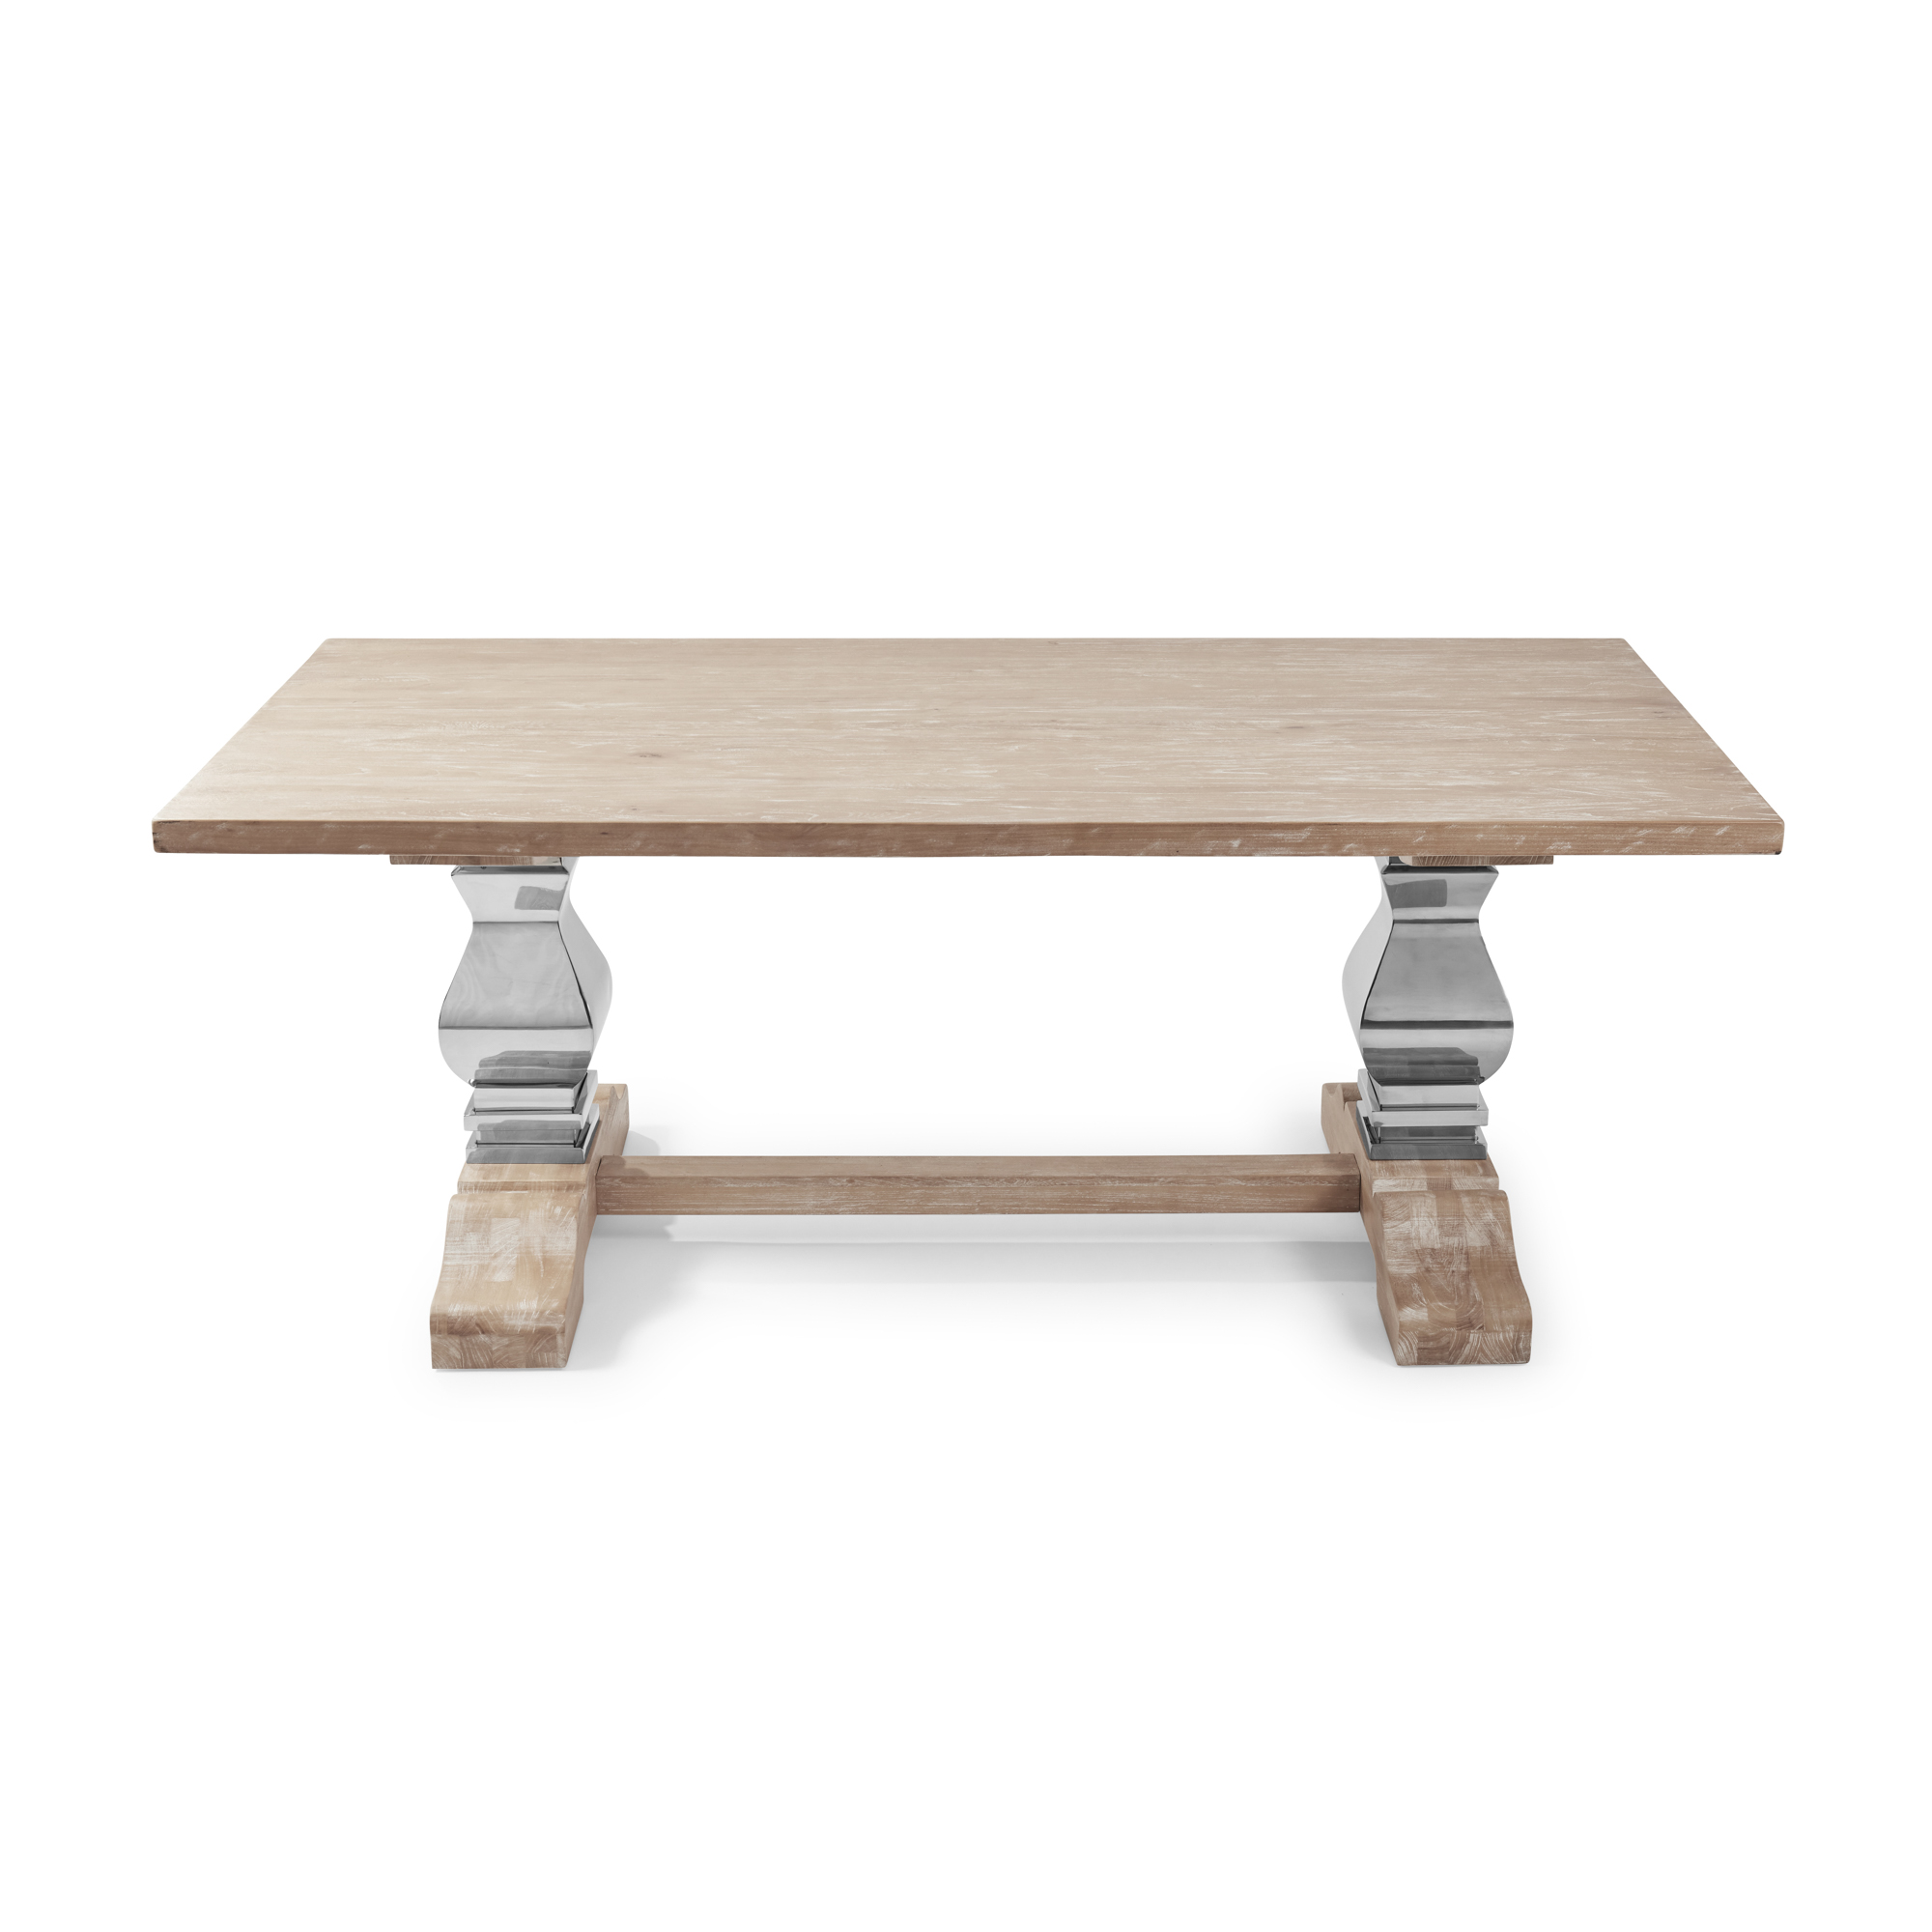 2m Solid Elm Refectory Dining Table